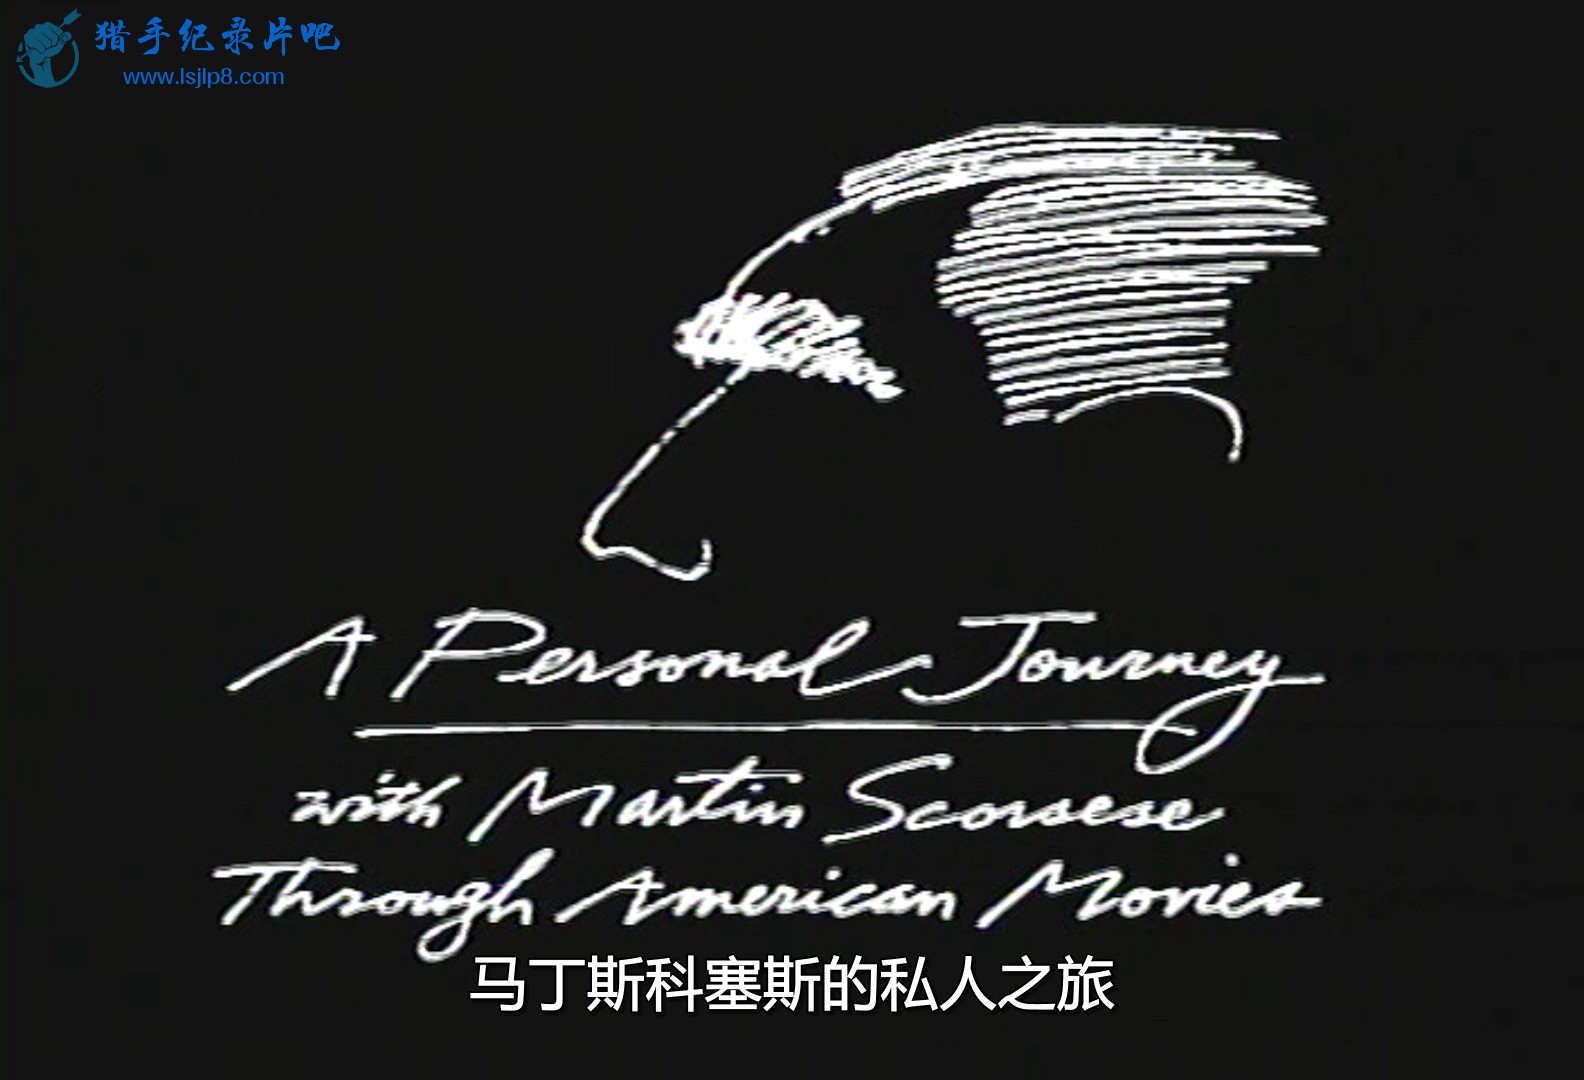 A.Personal.Journey.With.Martin.Scorsese.Through.American.Movies.1995.Part1.DVDRi.jpg